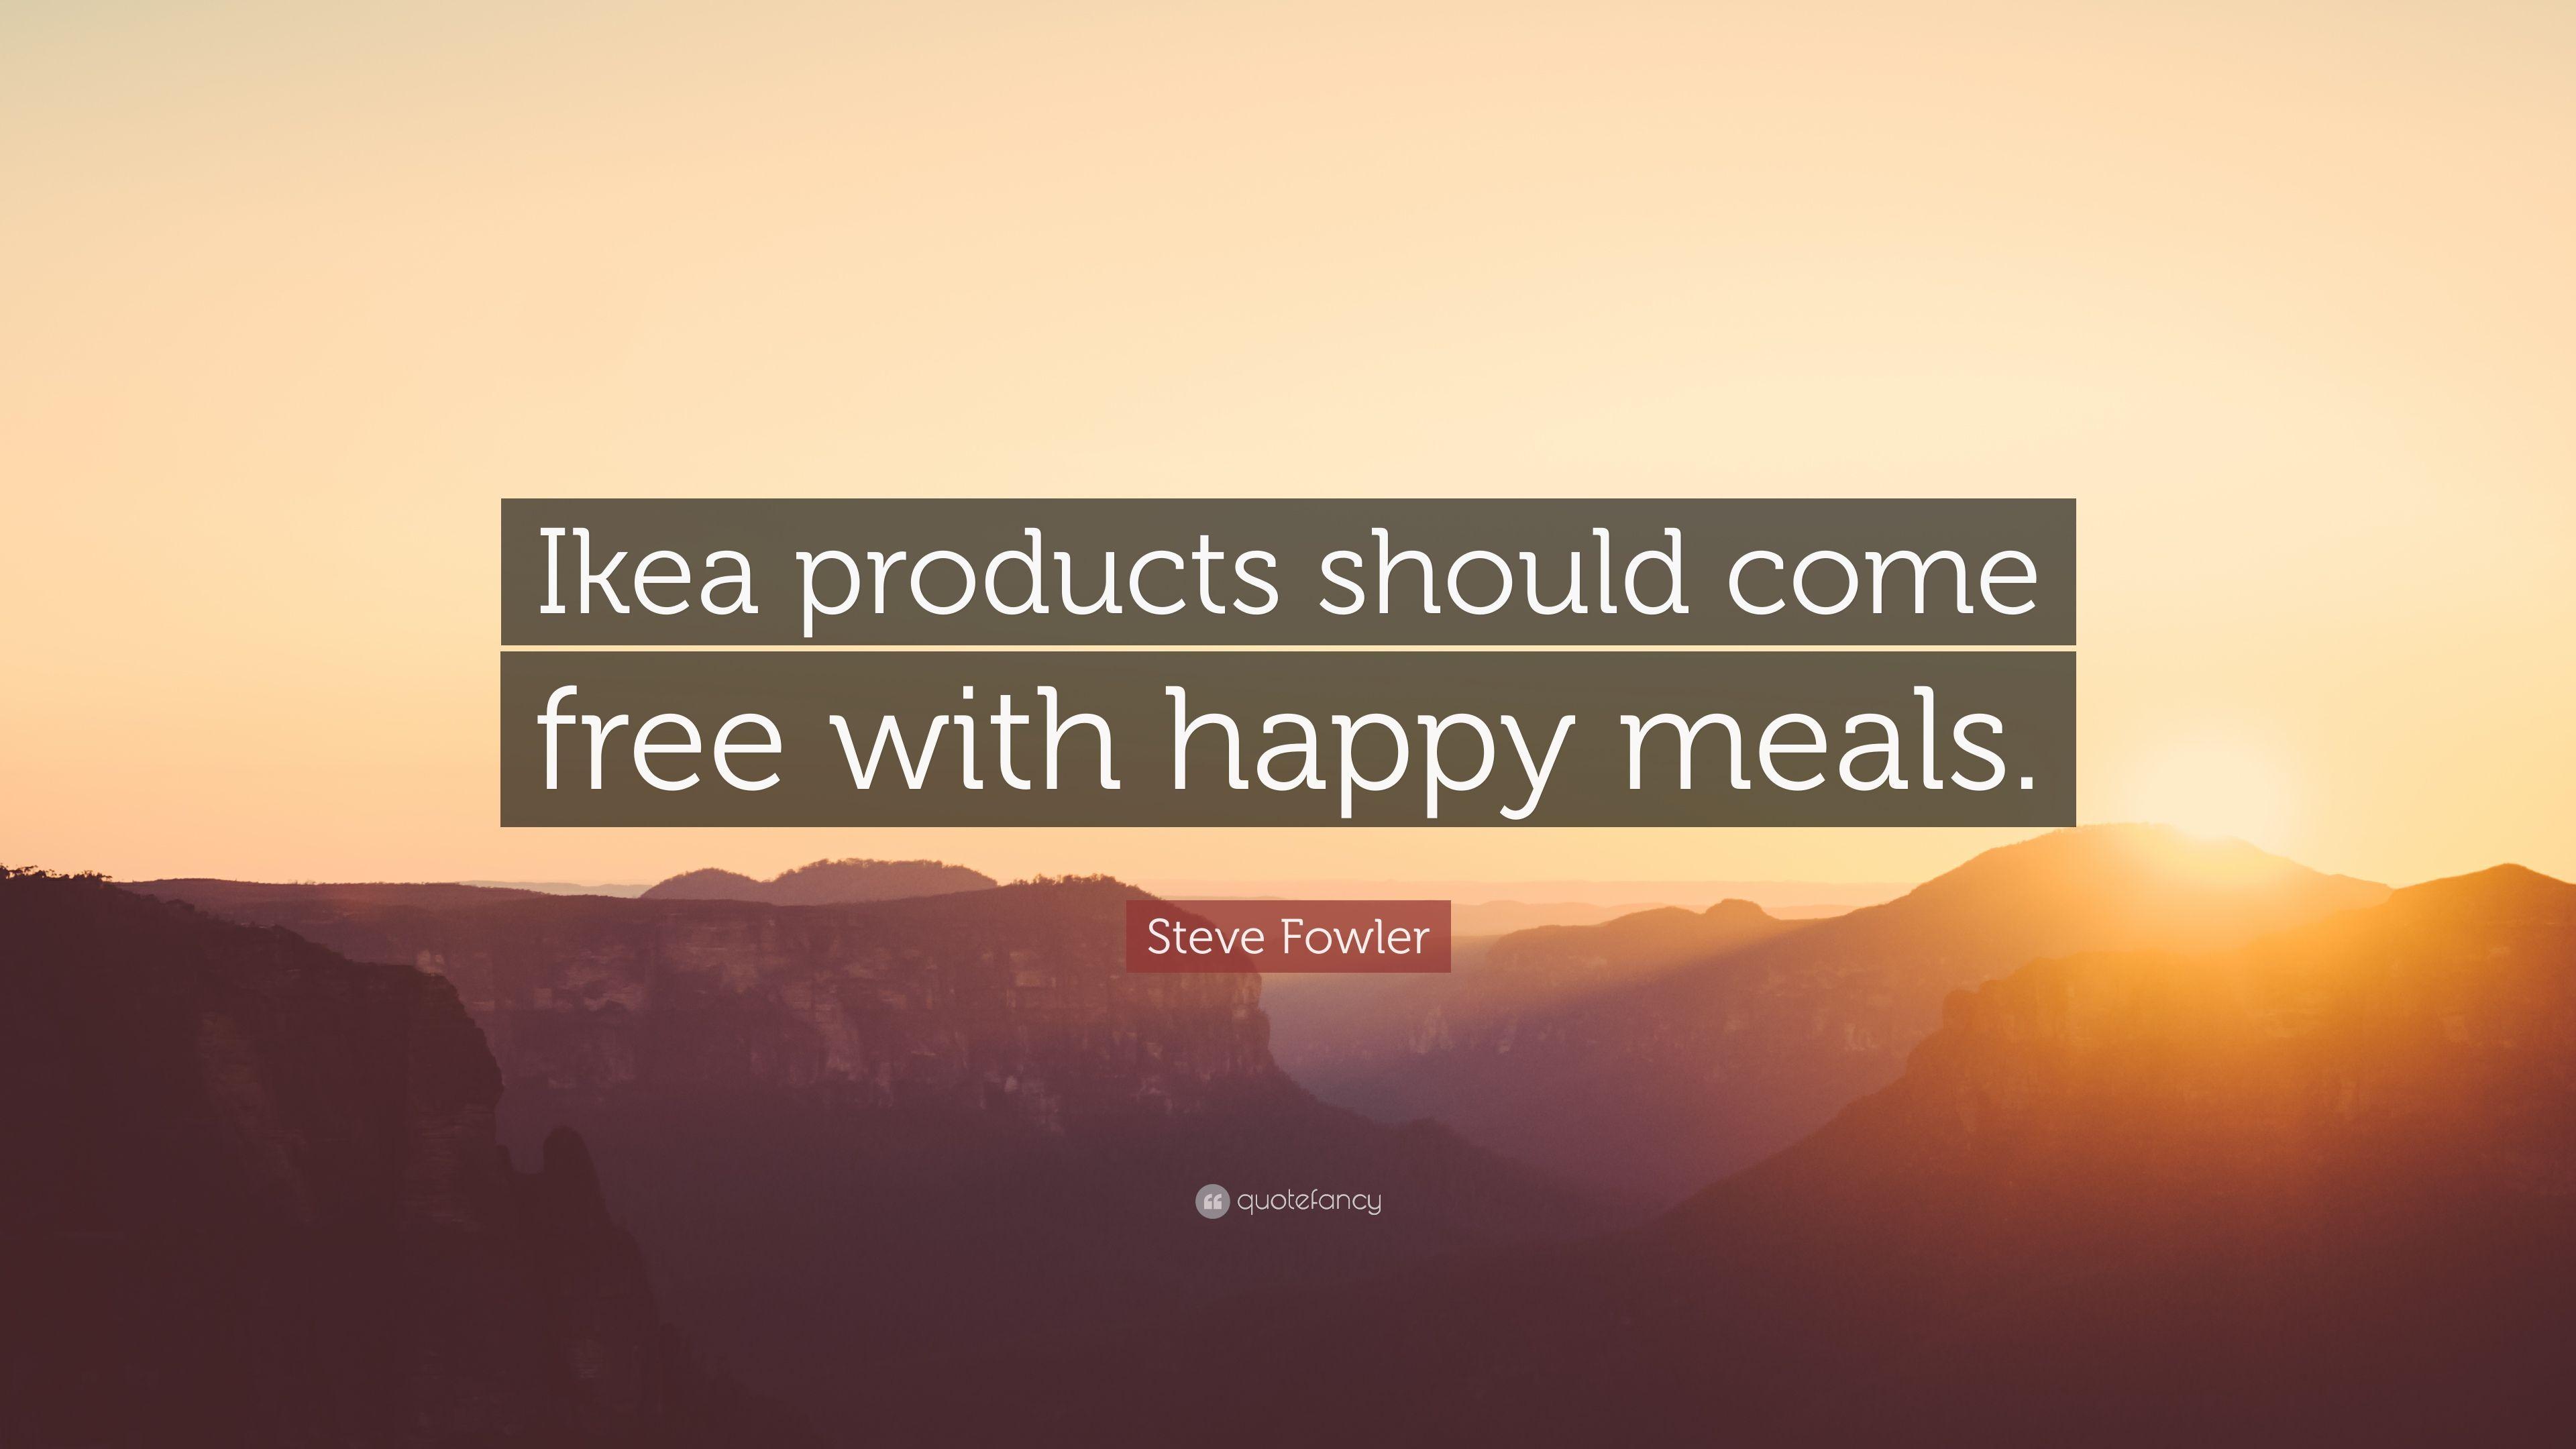 Steve Fowler Quote: “Ikea products should come free with happy meals